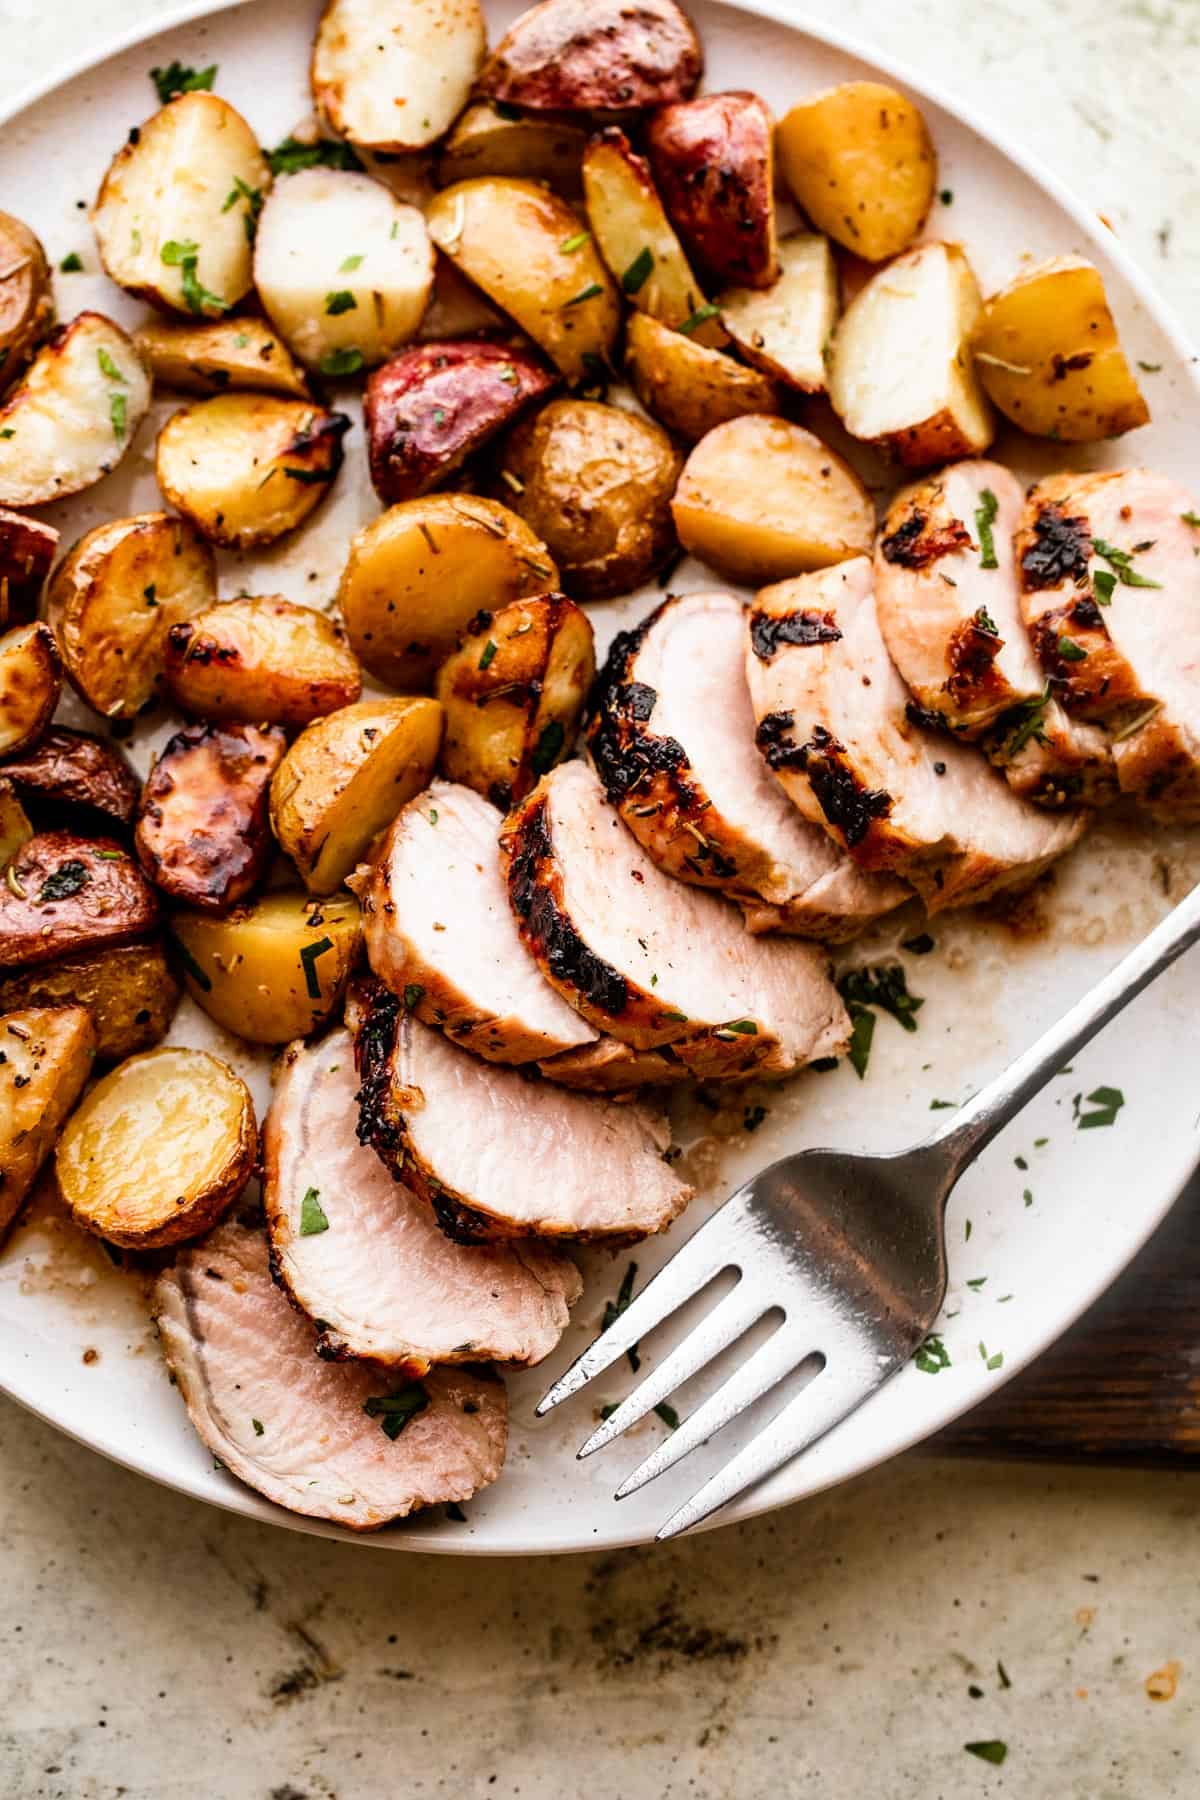 Slices of Roast Pork Tenderloin with Potatoes served on a white round dinner plate.